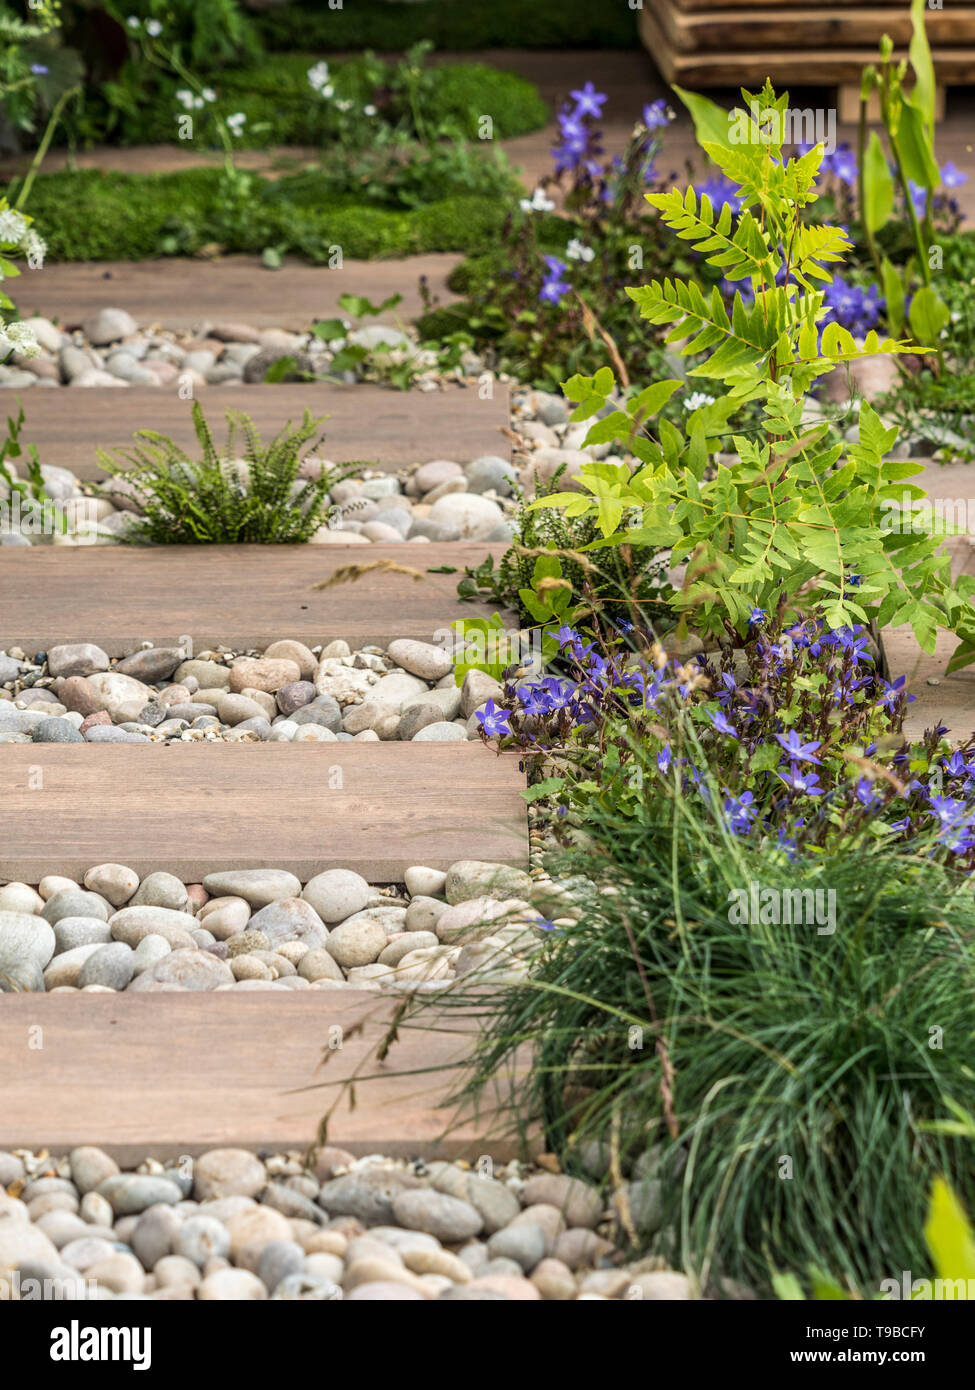 Wooden planks used as path surrounded by pebbles and interspersed with plants in garden Stock Photo